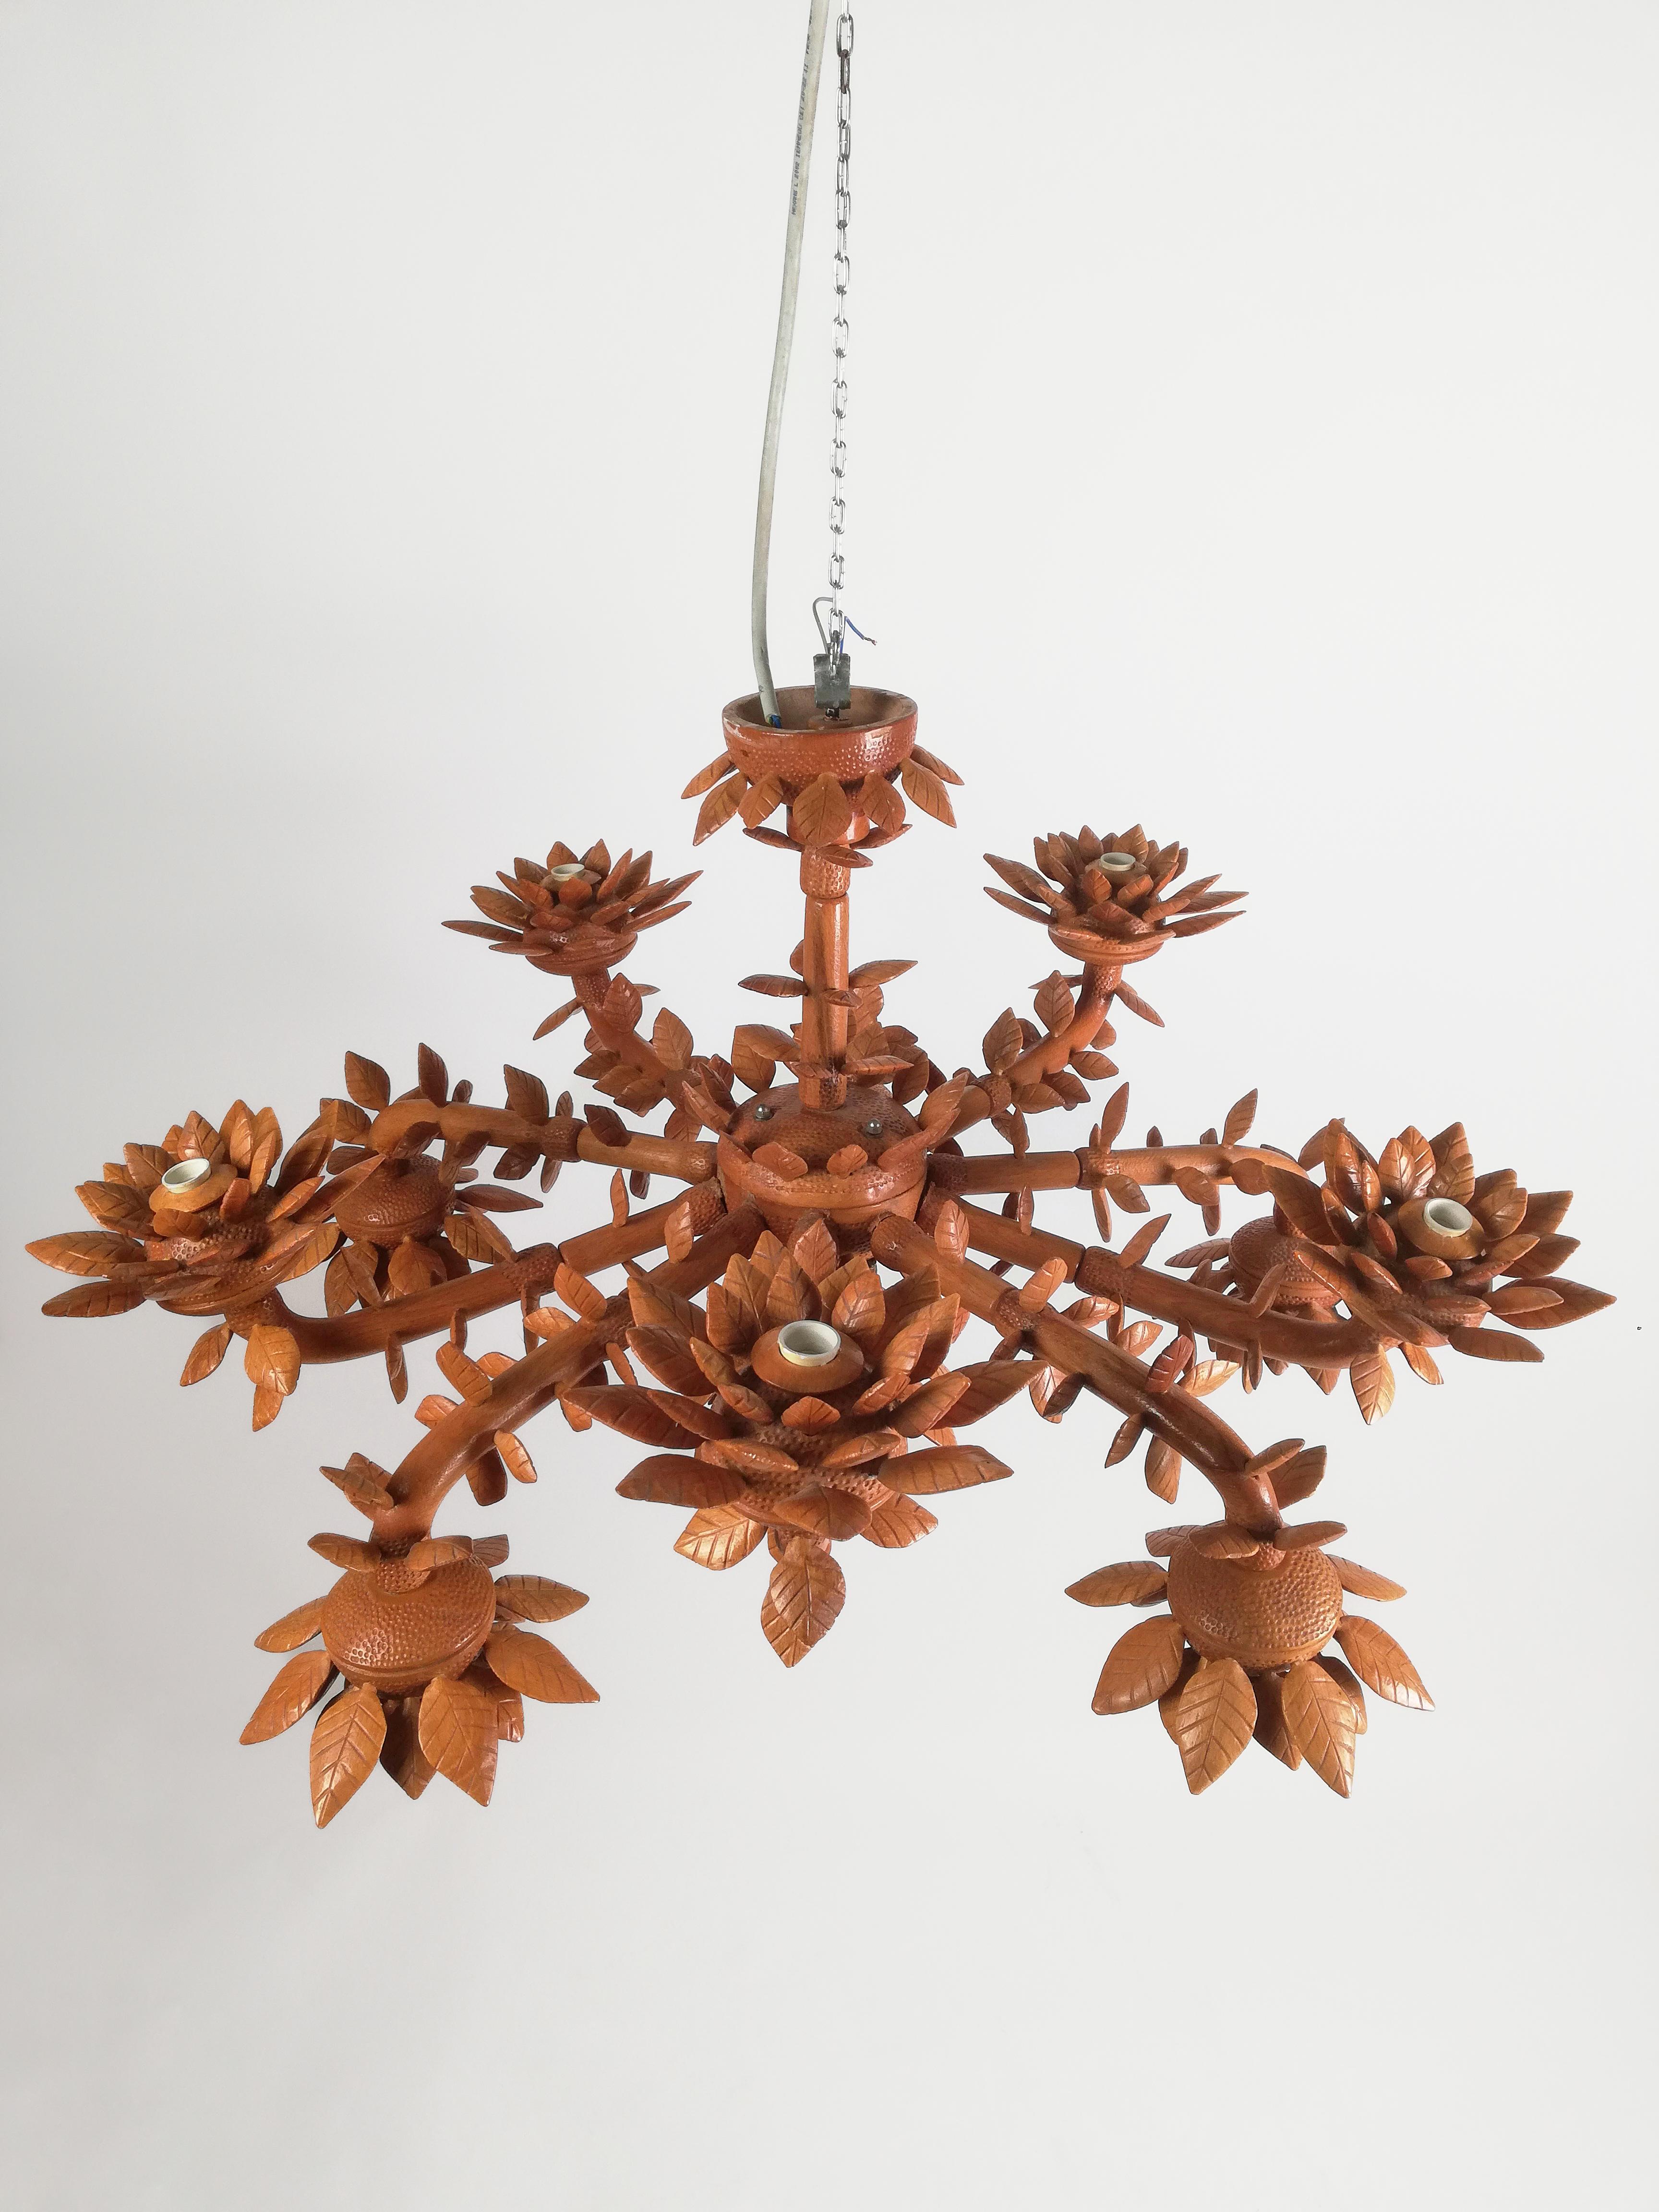 Sculptural Large Floral Chandelier in Hand Carved Solid Wood, Italy, 1970s For Sale 9